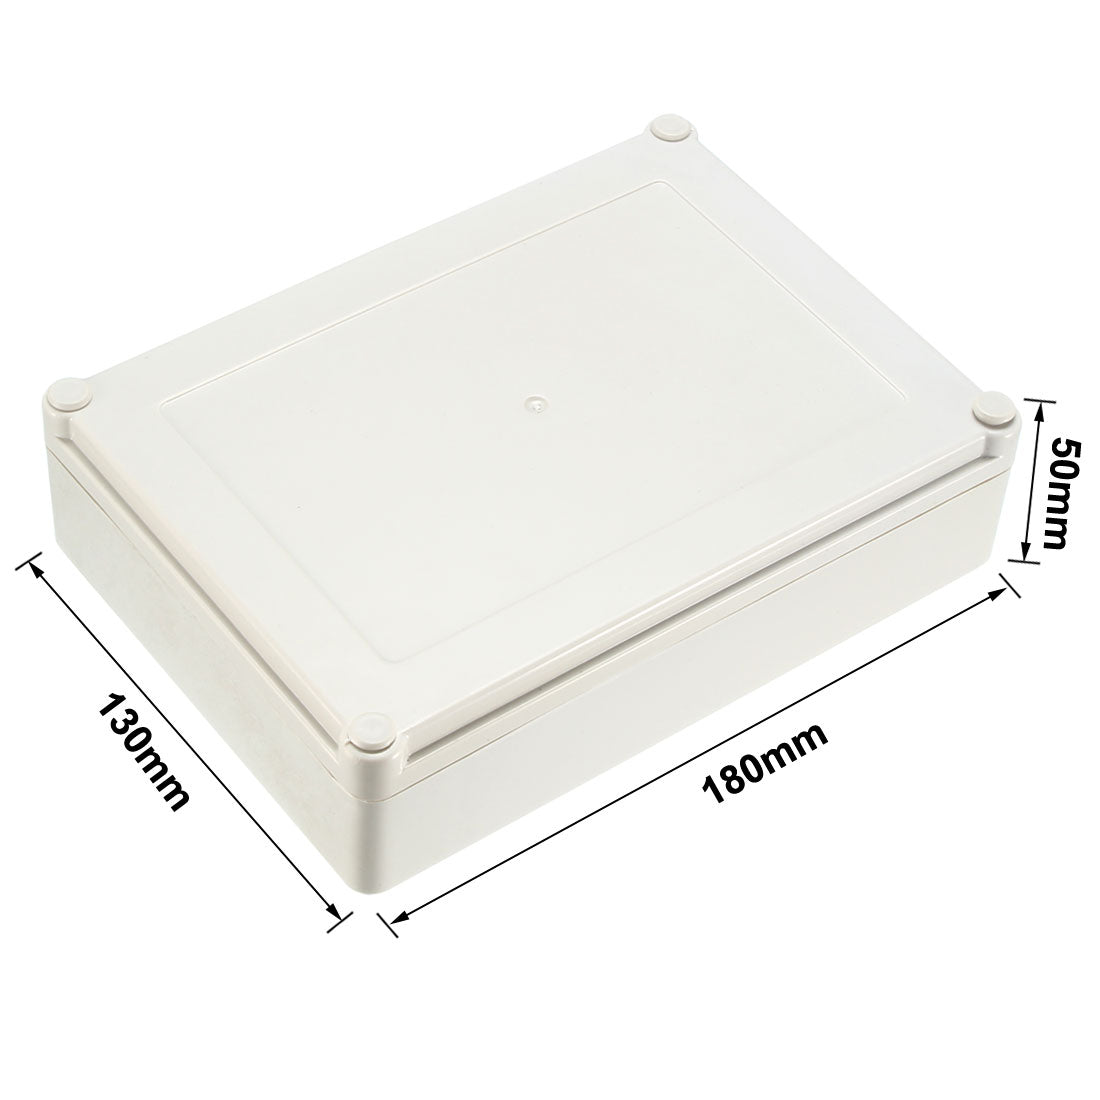 uxcell Uxcell 180*130*50mm Electronic Waterproof IP65 Sealed ABS Plastic DIY Junction Box Enclosure Case Gray